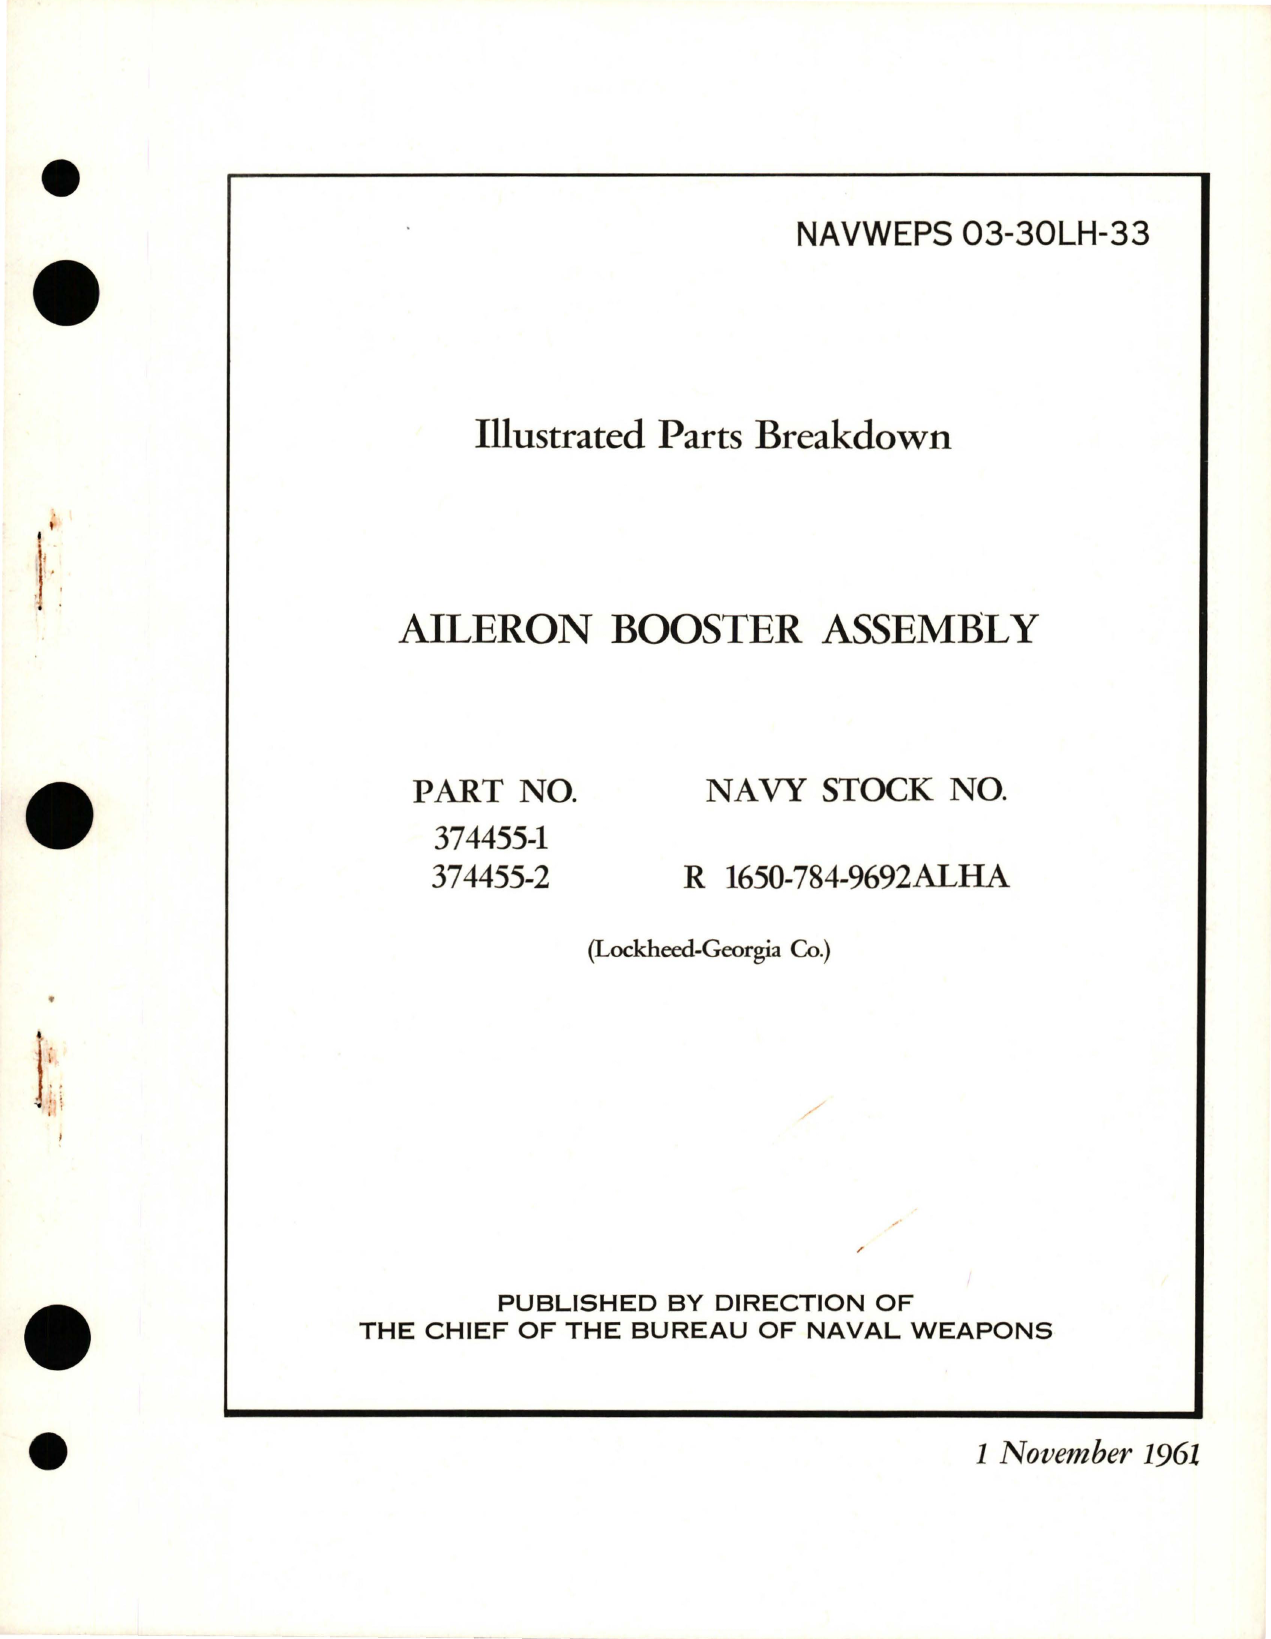 Sample page 1 from AirCorps Library document: Illustrated Parts Breakdown for Aileron Booster Assembly - Parts 374455-1 and 374455-2 